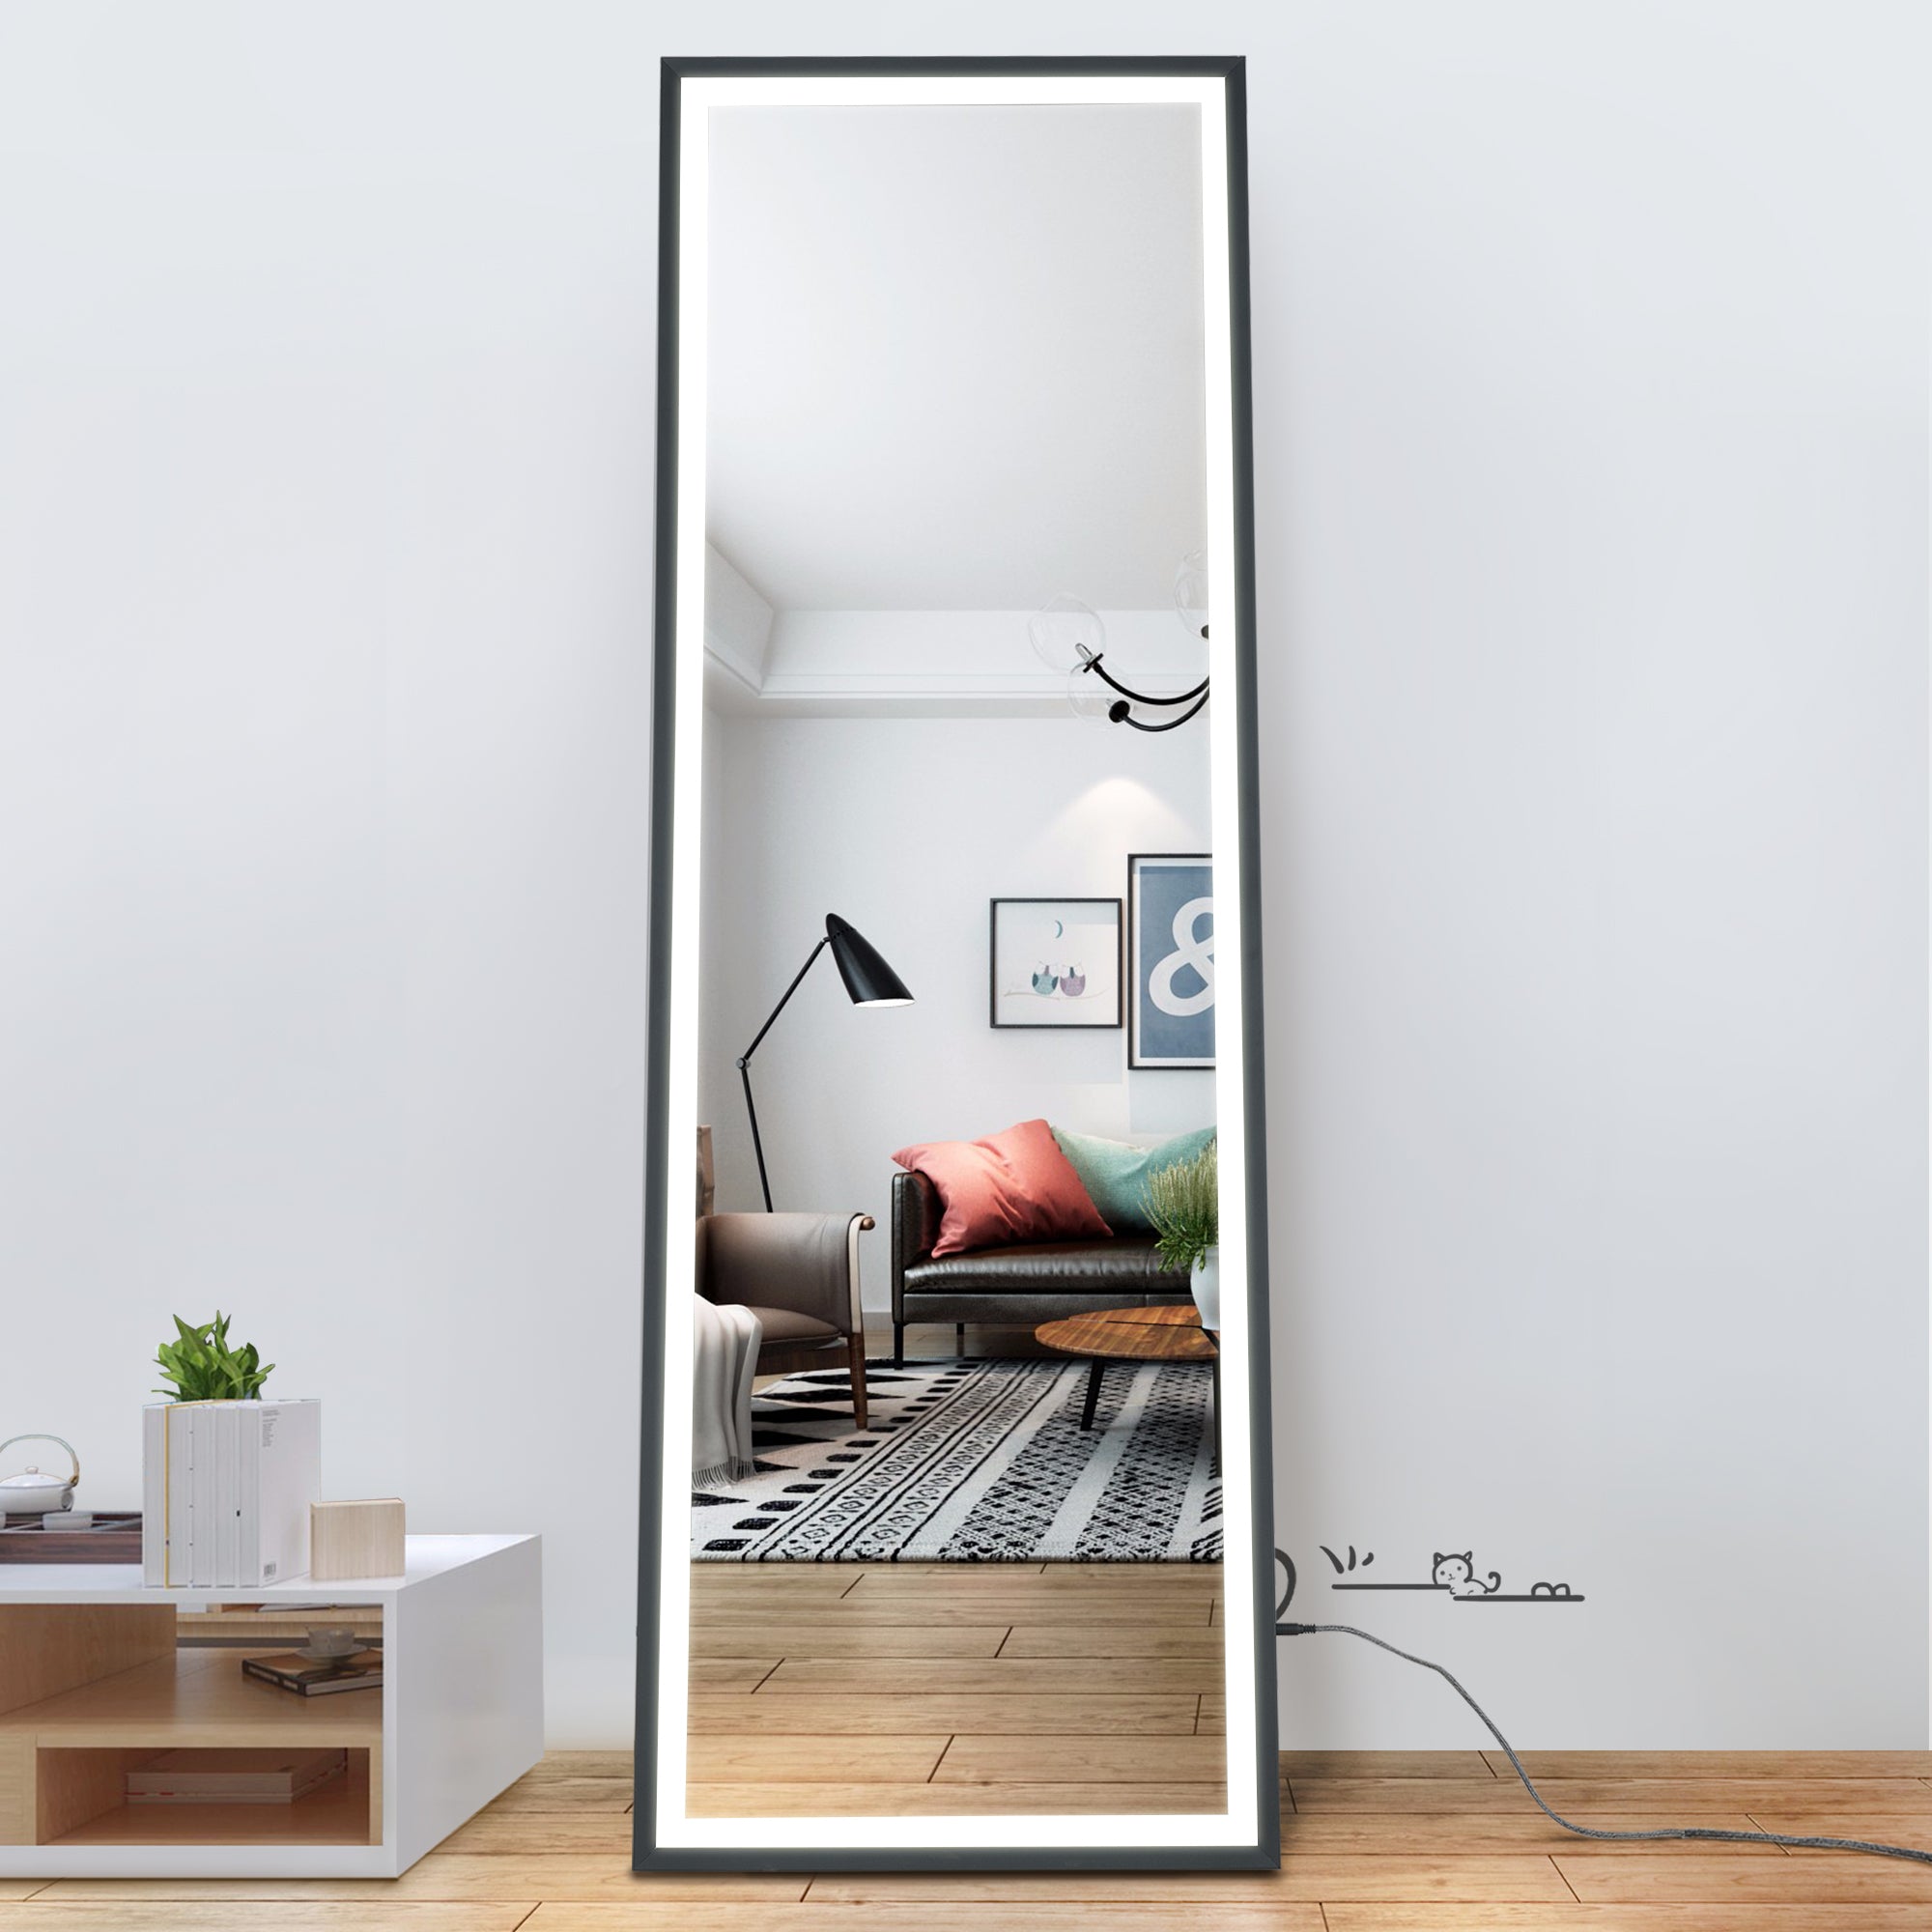 LED Full Length Mirror wall Mounted with Light (Black)